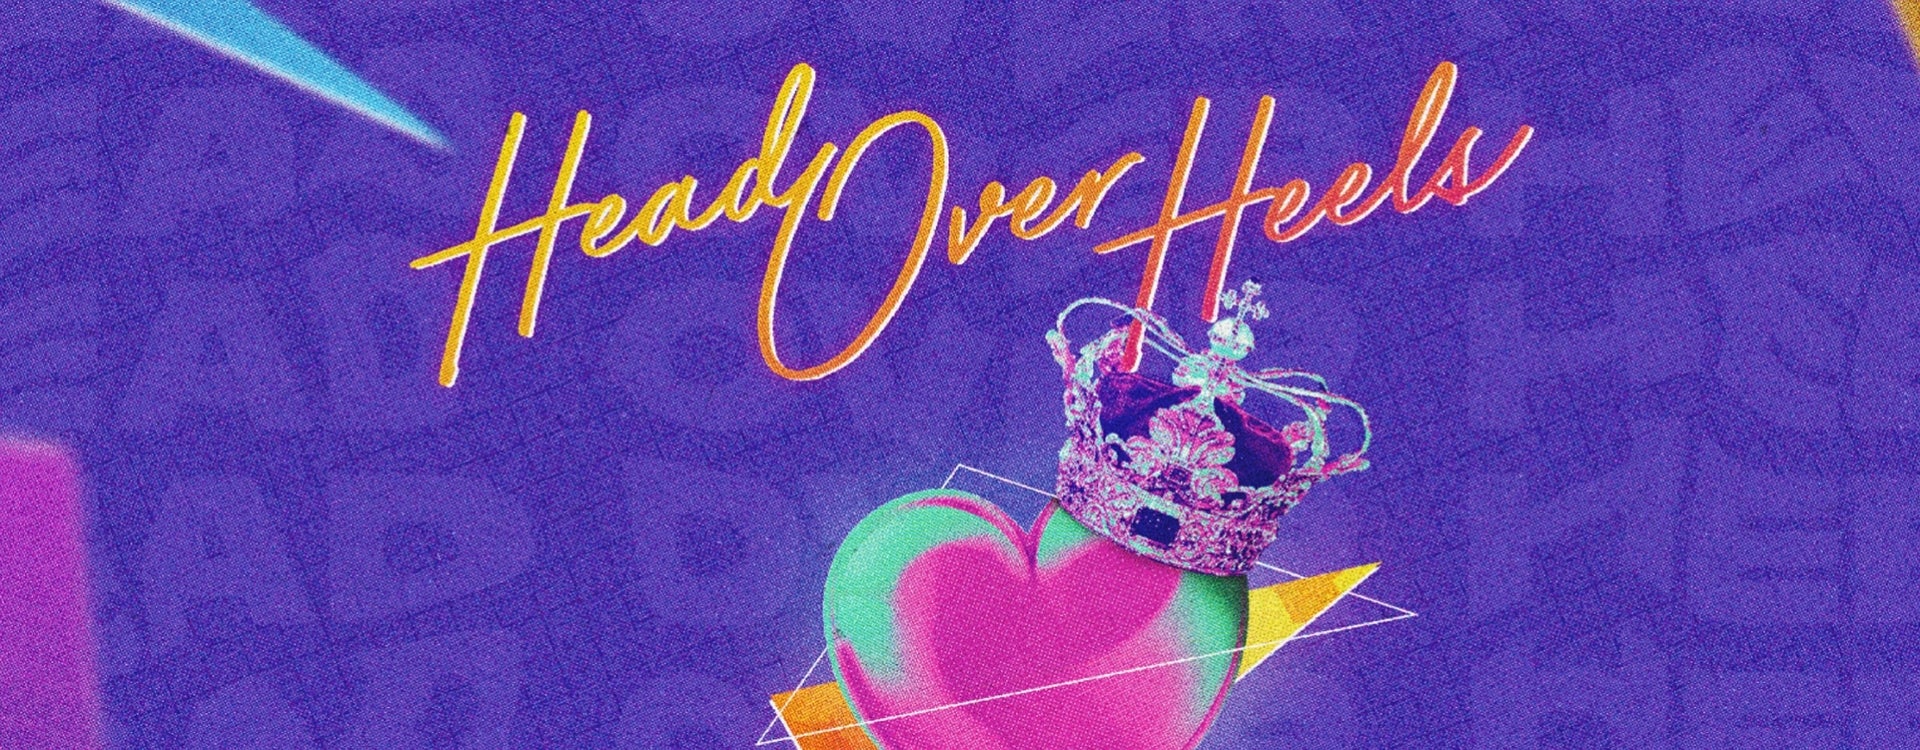 Head Over Heels - A New Musical Original Broadway Cast Recording Album -  The Official Masterworks Broadway Site